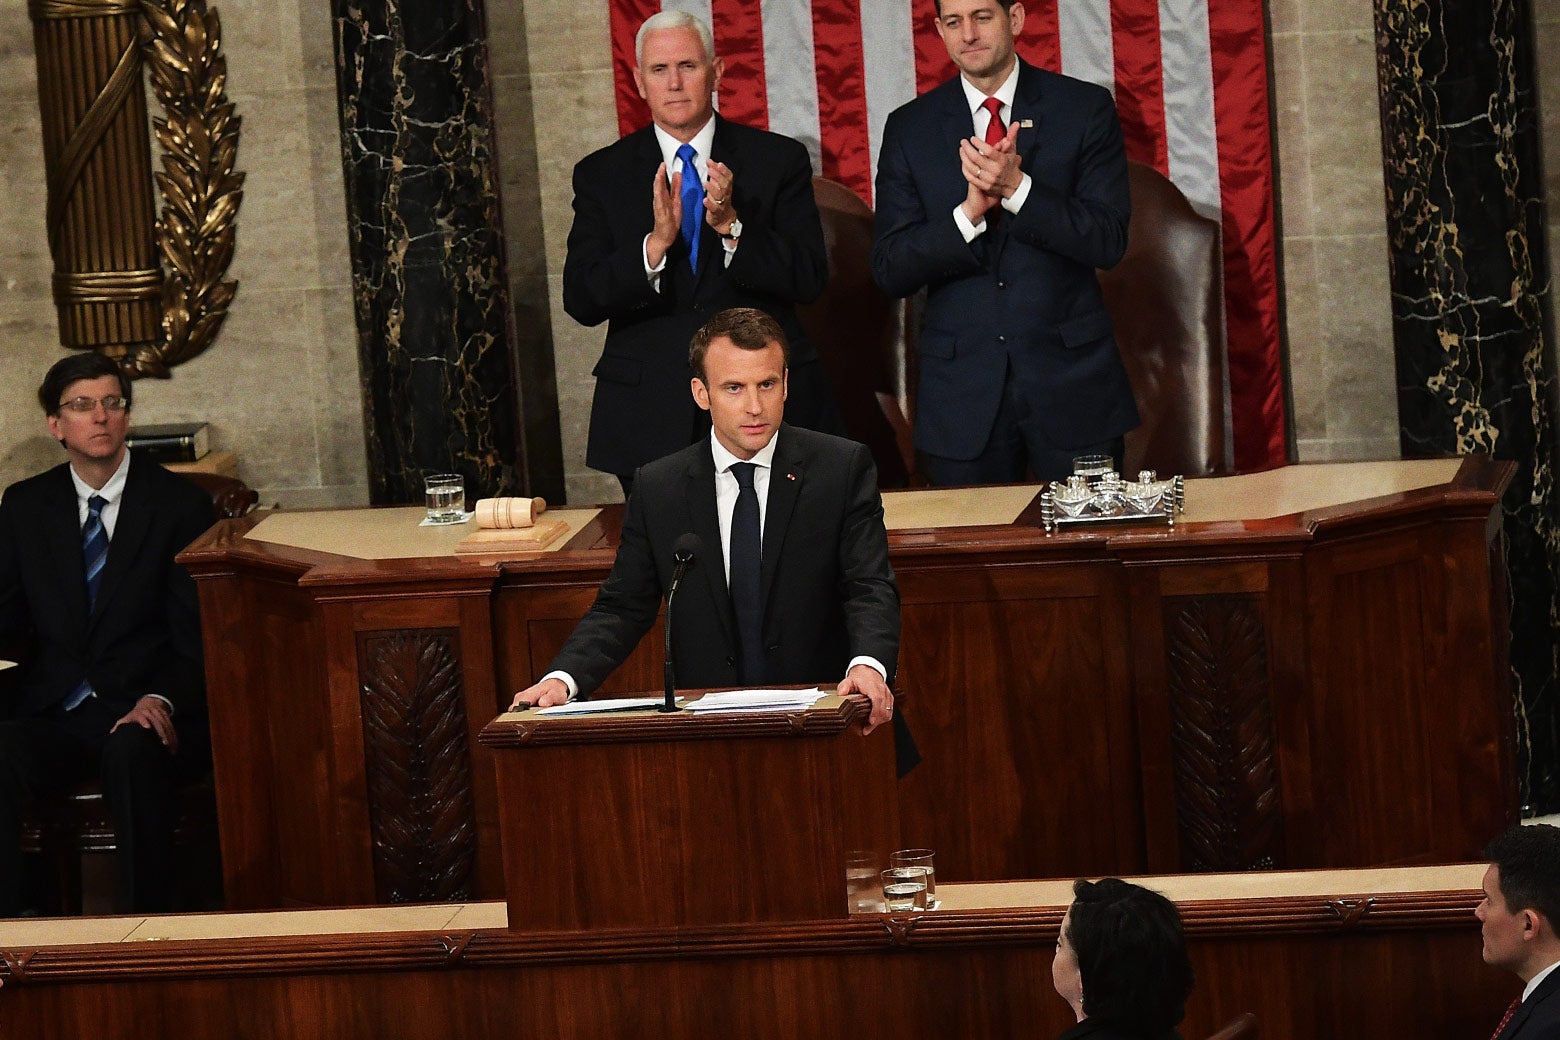 House Speaker Paul Ryan and Vice President Mike Pence applaud after France's President Emmanuel Macron addresses Congress on Wednesday in Washington.